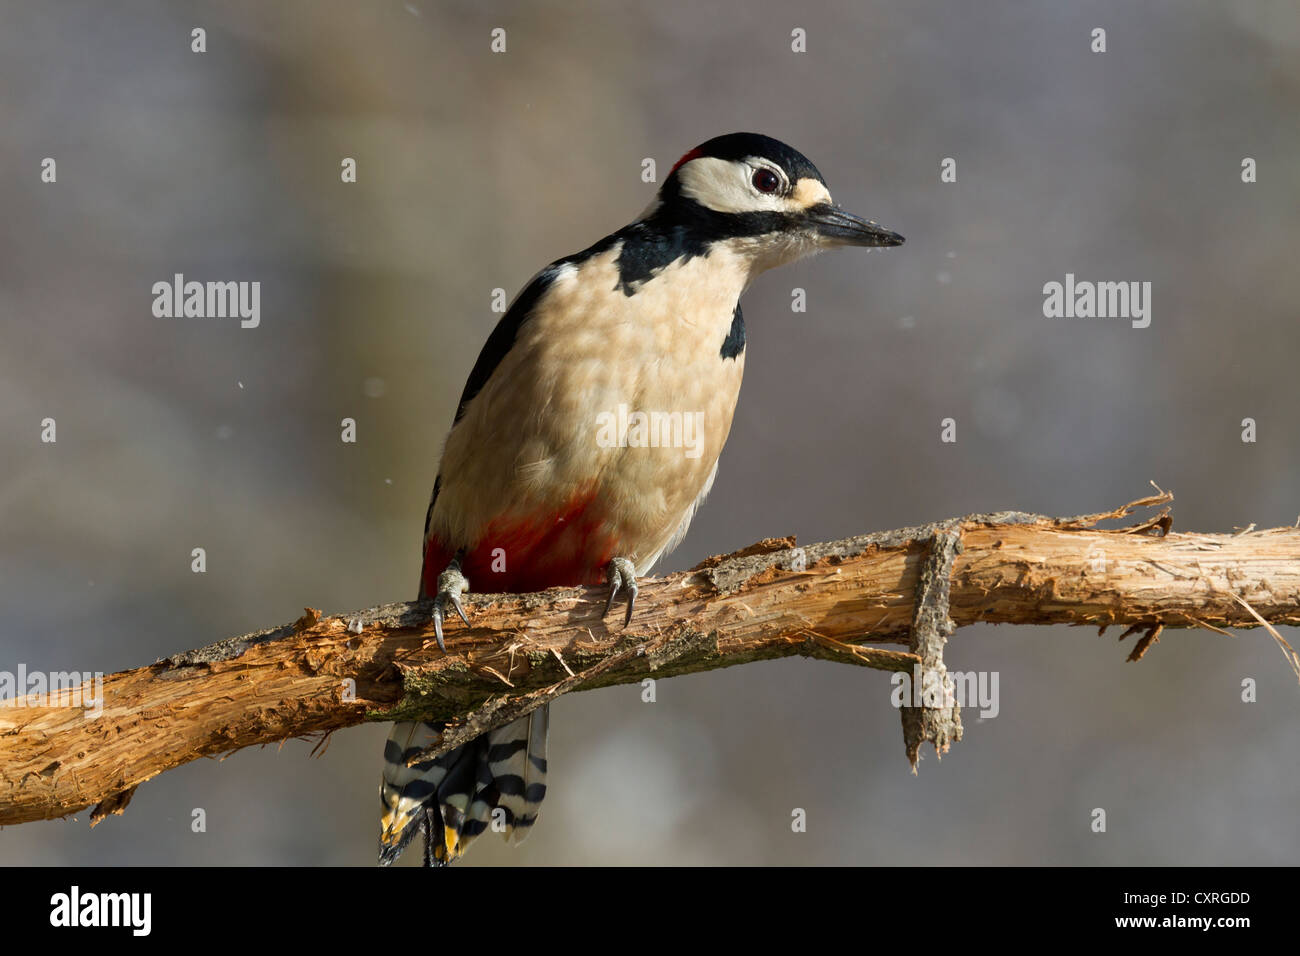 Great Spotted Woodpecker or Greater Spotted Woodpecker (Dendrocopos major), perched on a branch, Bad Sooden-Allendorf, Hesse Stock Photo